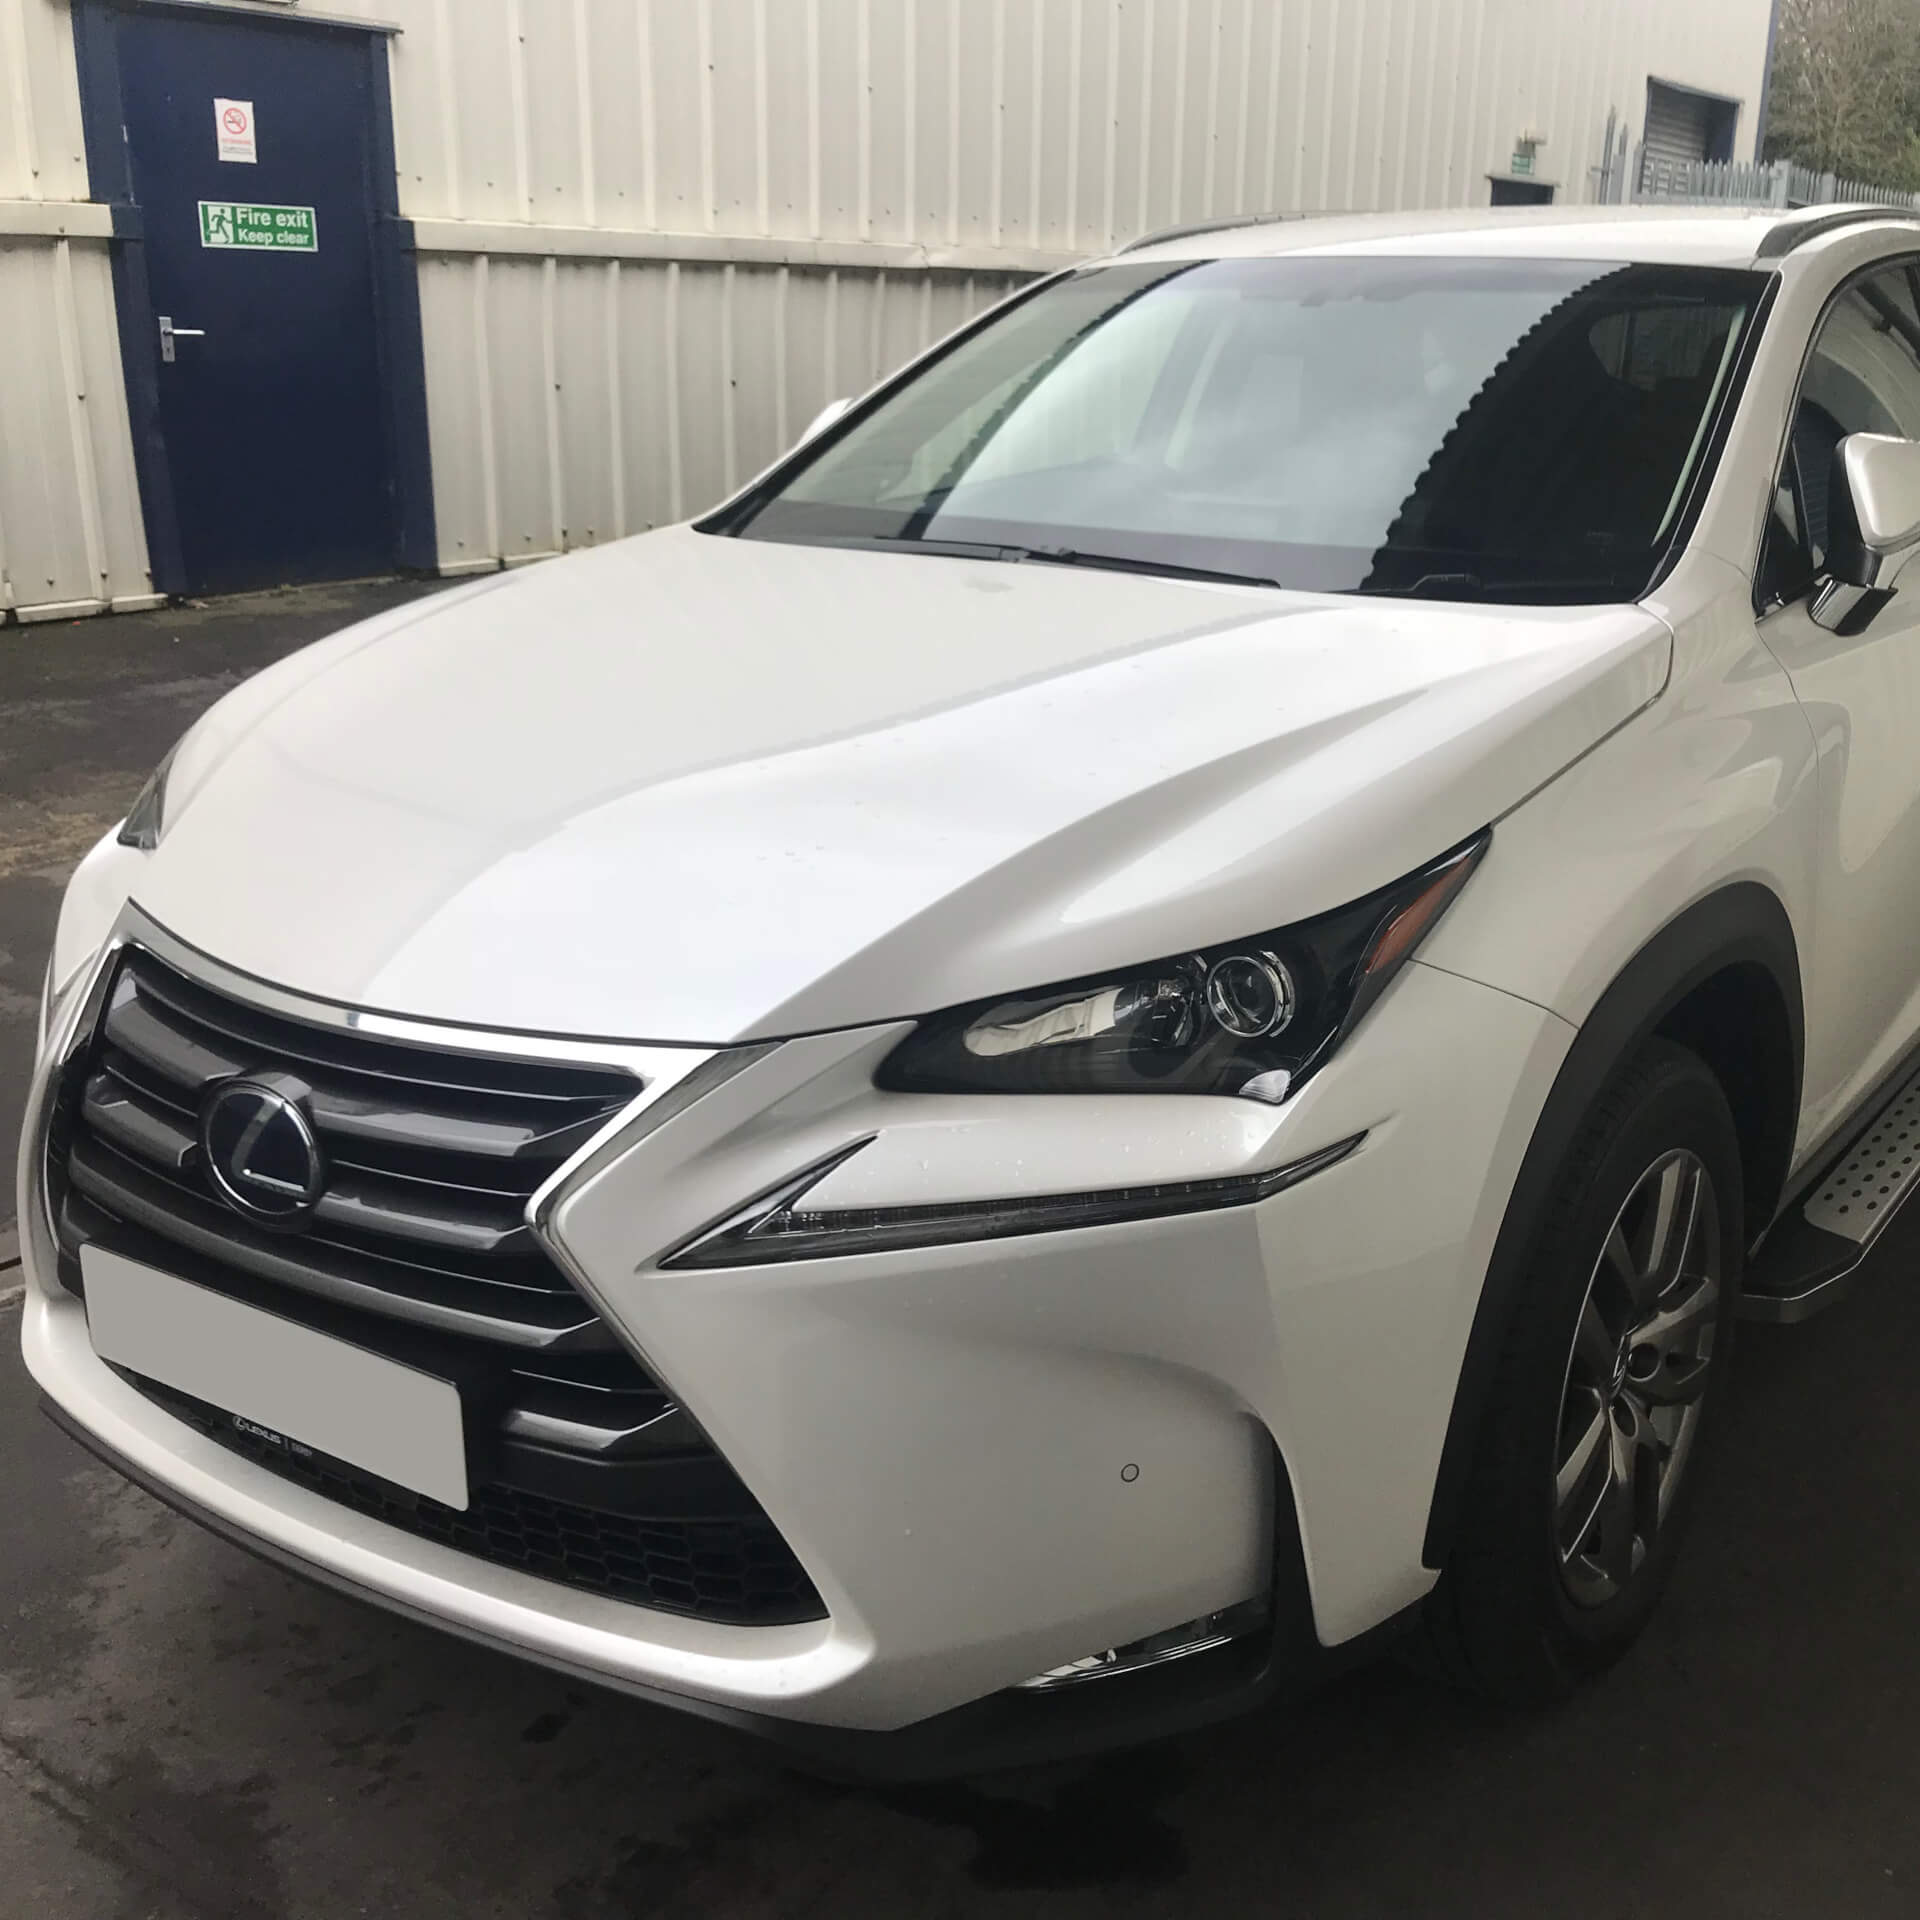 Direct4x4 accessories for Lexus NX300h vehicles with a photo of the front of a white Lexus NX300h fitted with freedom style side steps